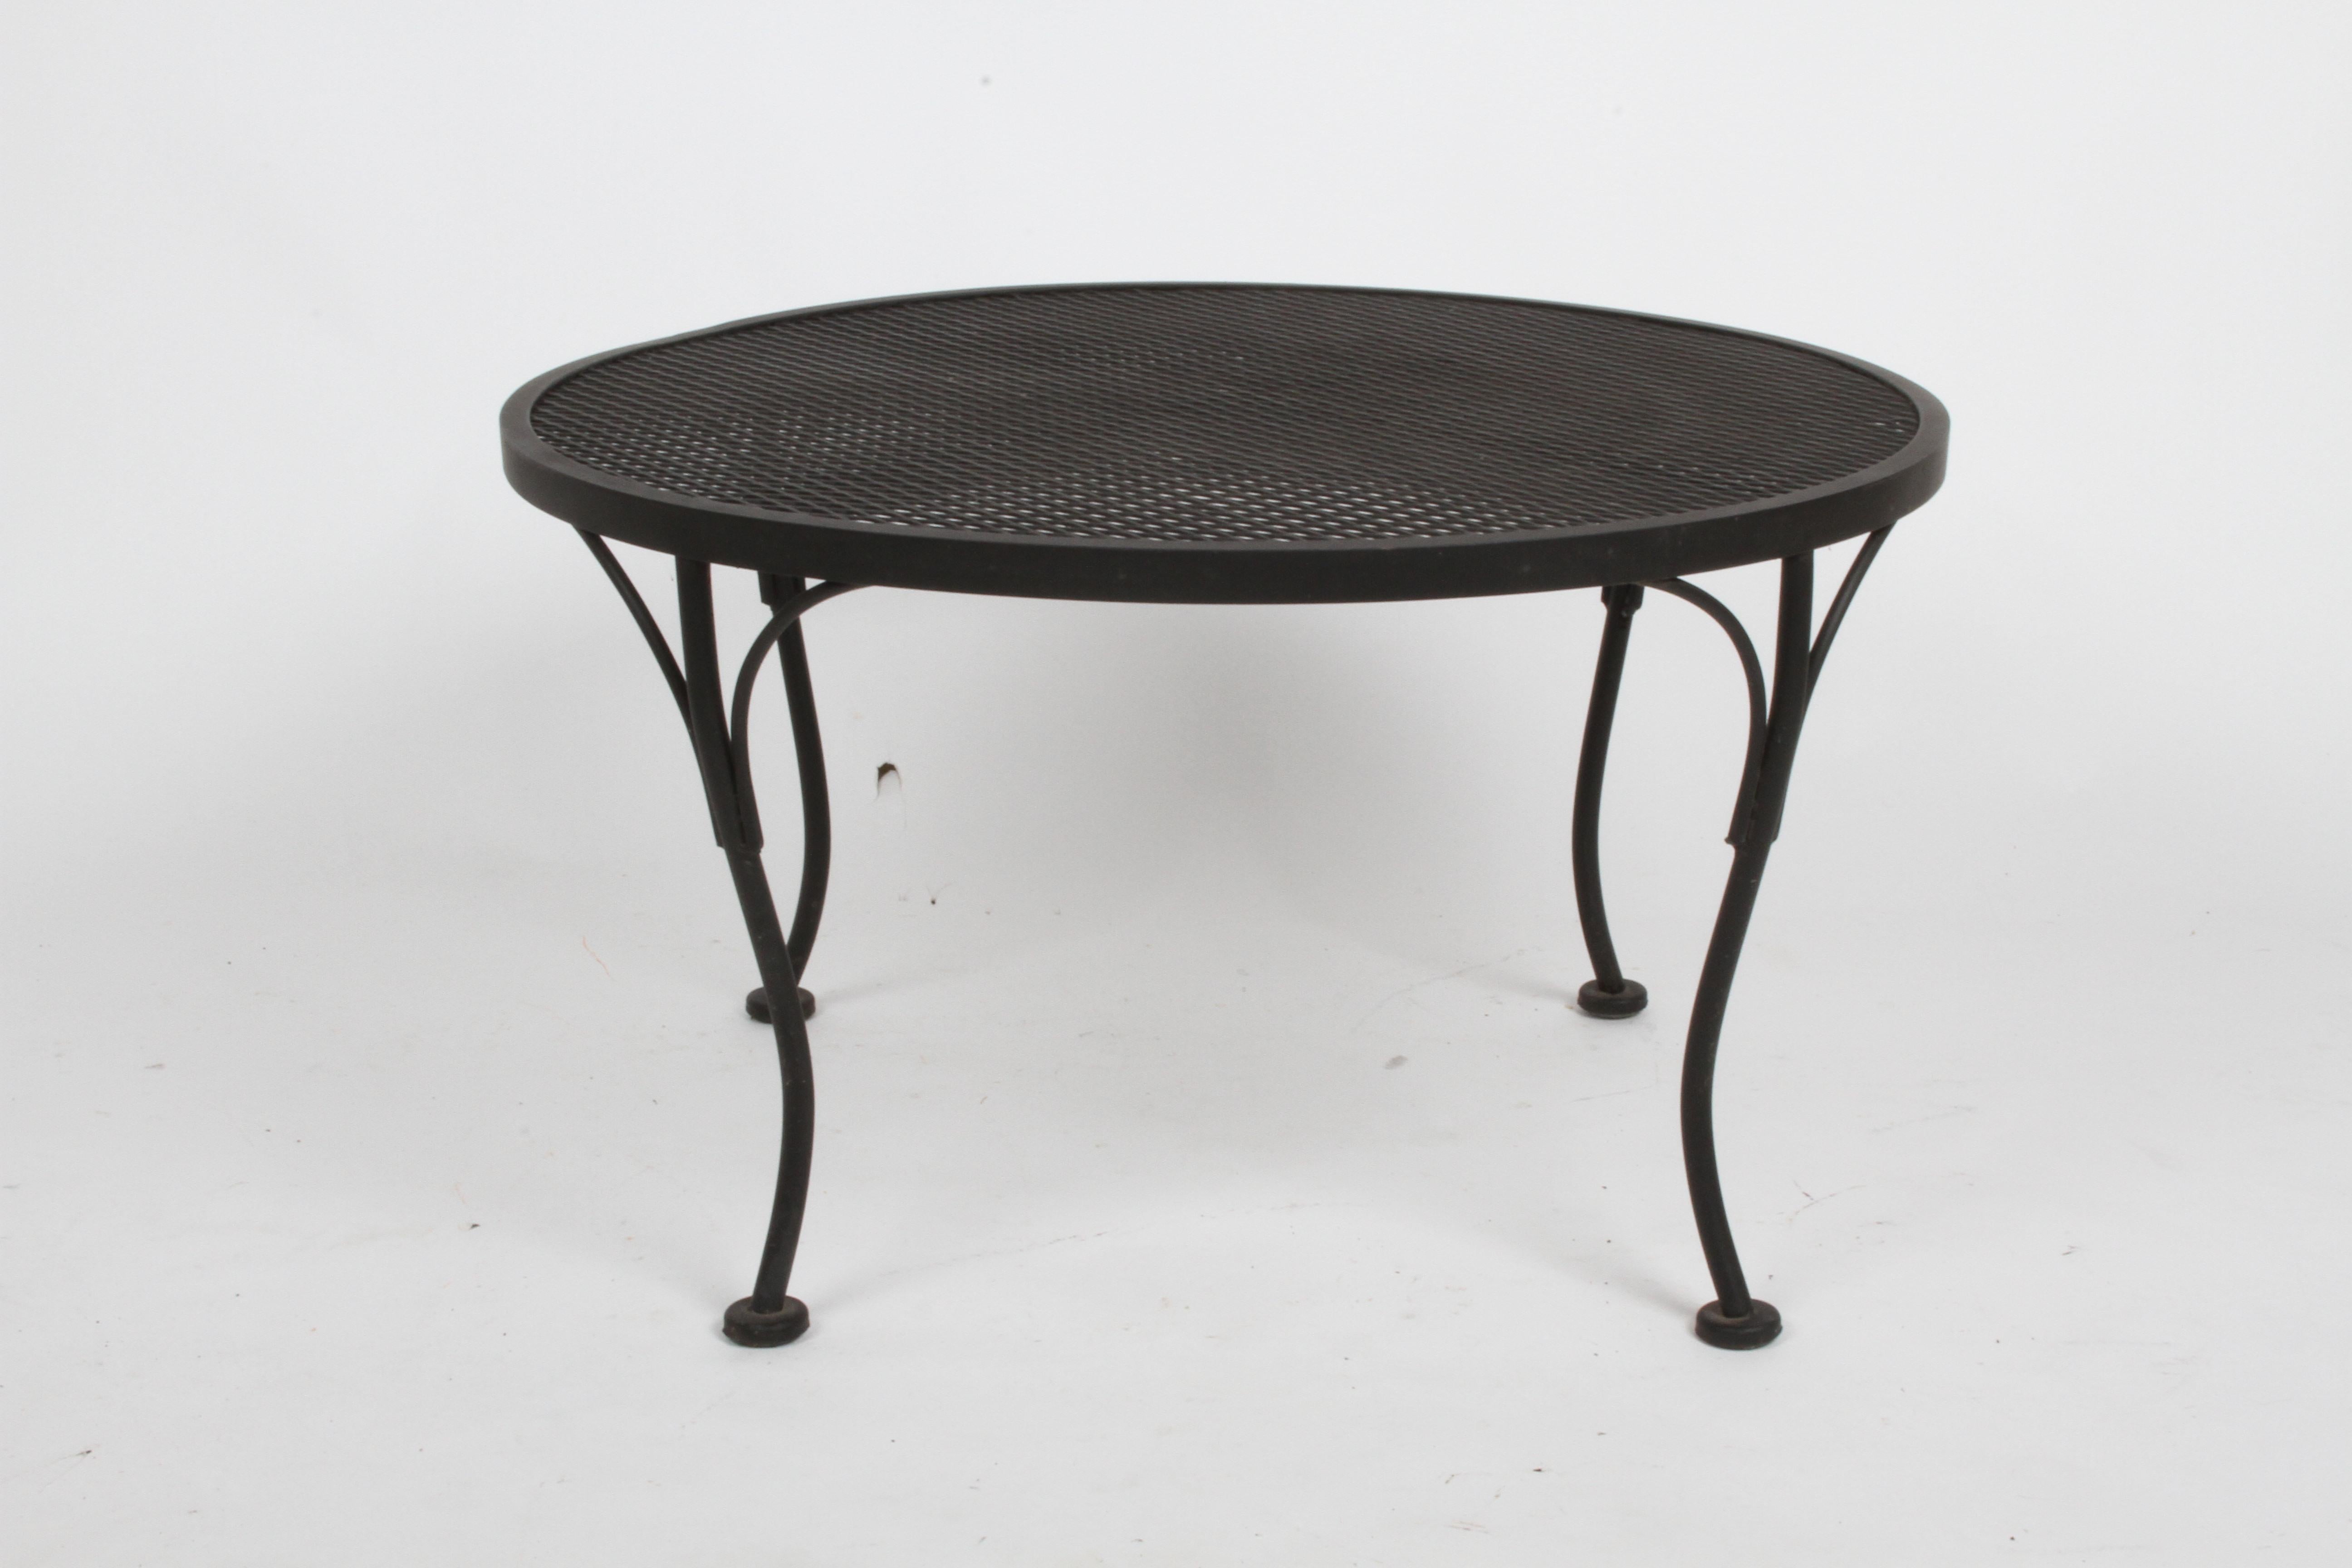 Russell Woodard designed round coffee or side often see along side his Sculptura line chairs and settees. Shown in original matte black paint is sold, is now sold . I have one in green paint , price Includes, blasting, rust inhibitor and new paint